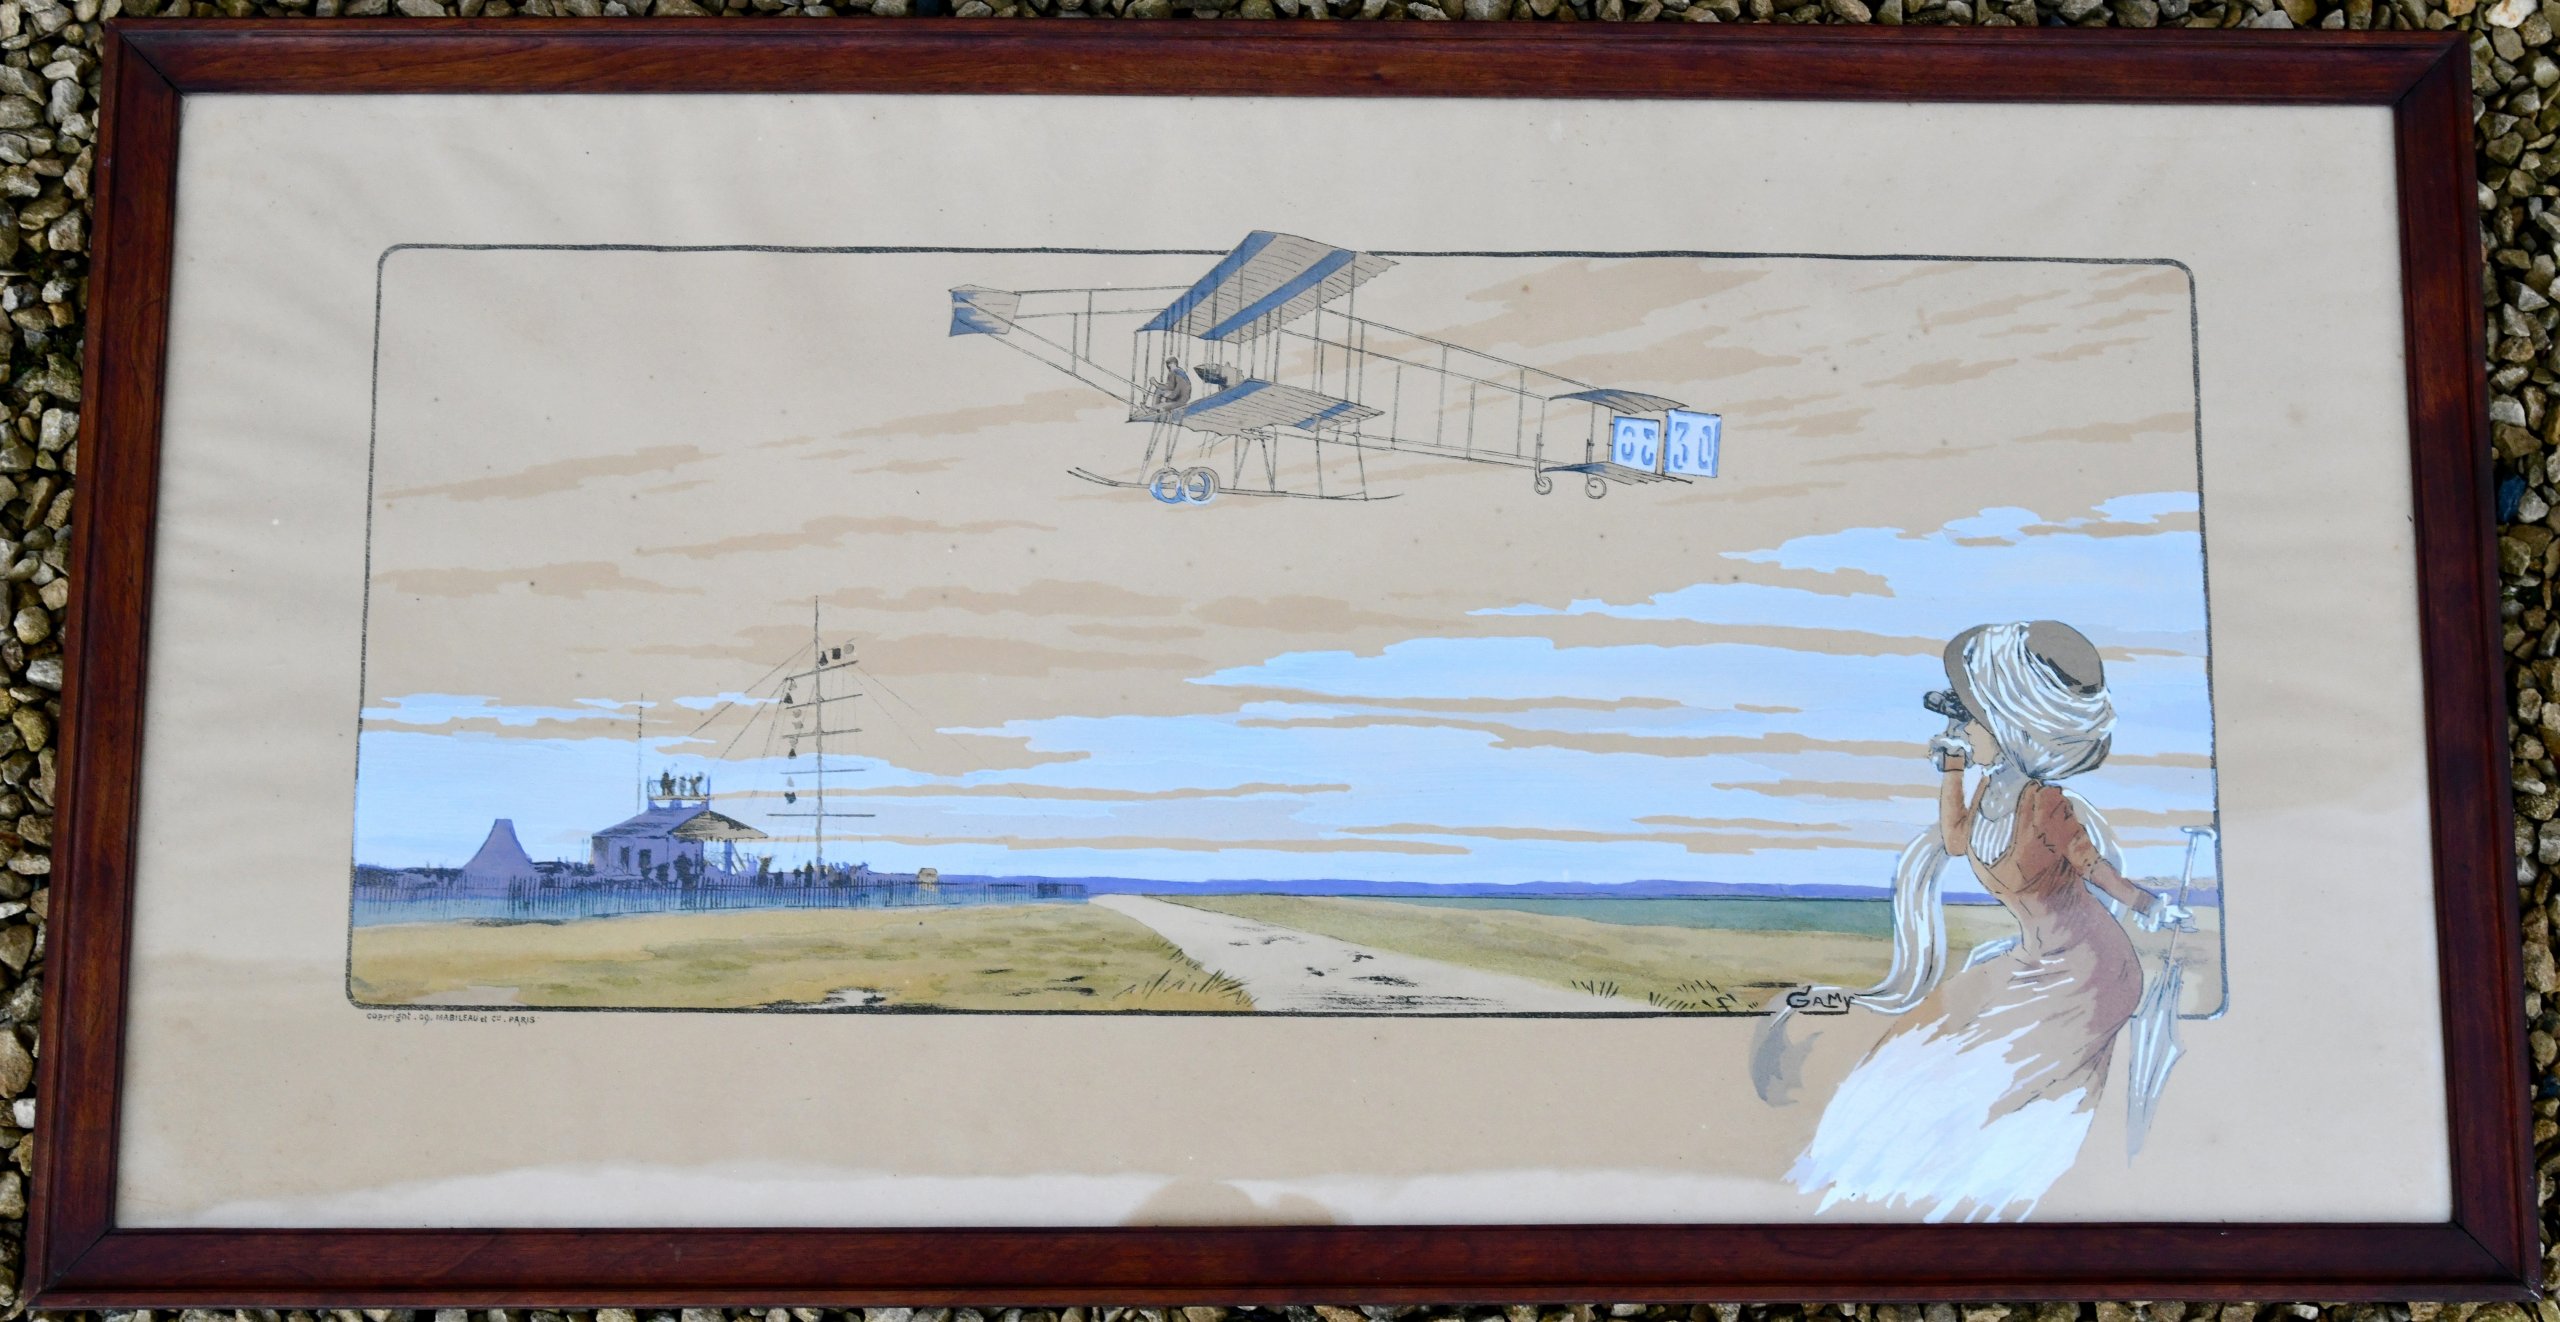 Pair of Art Nouveau lithographs with airplanes